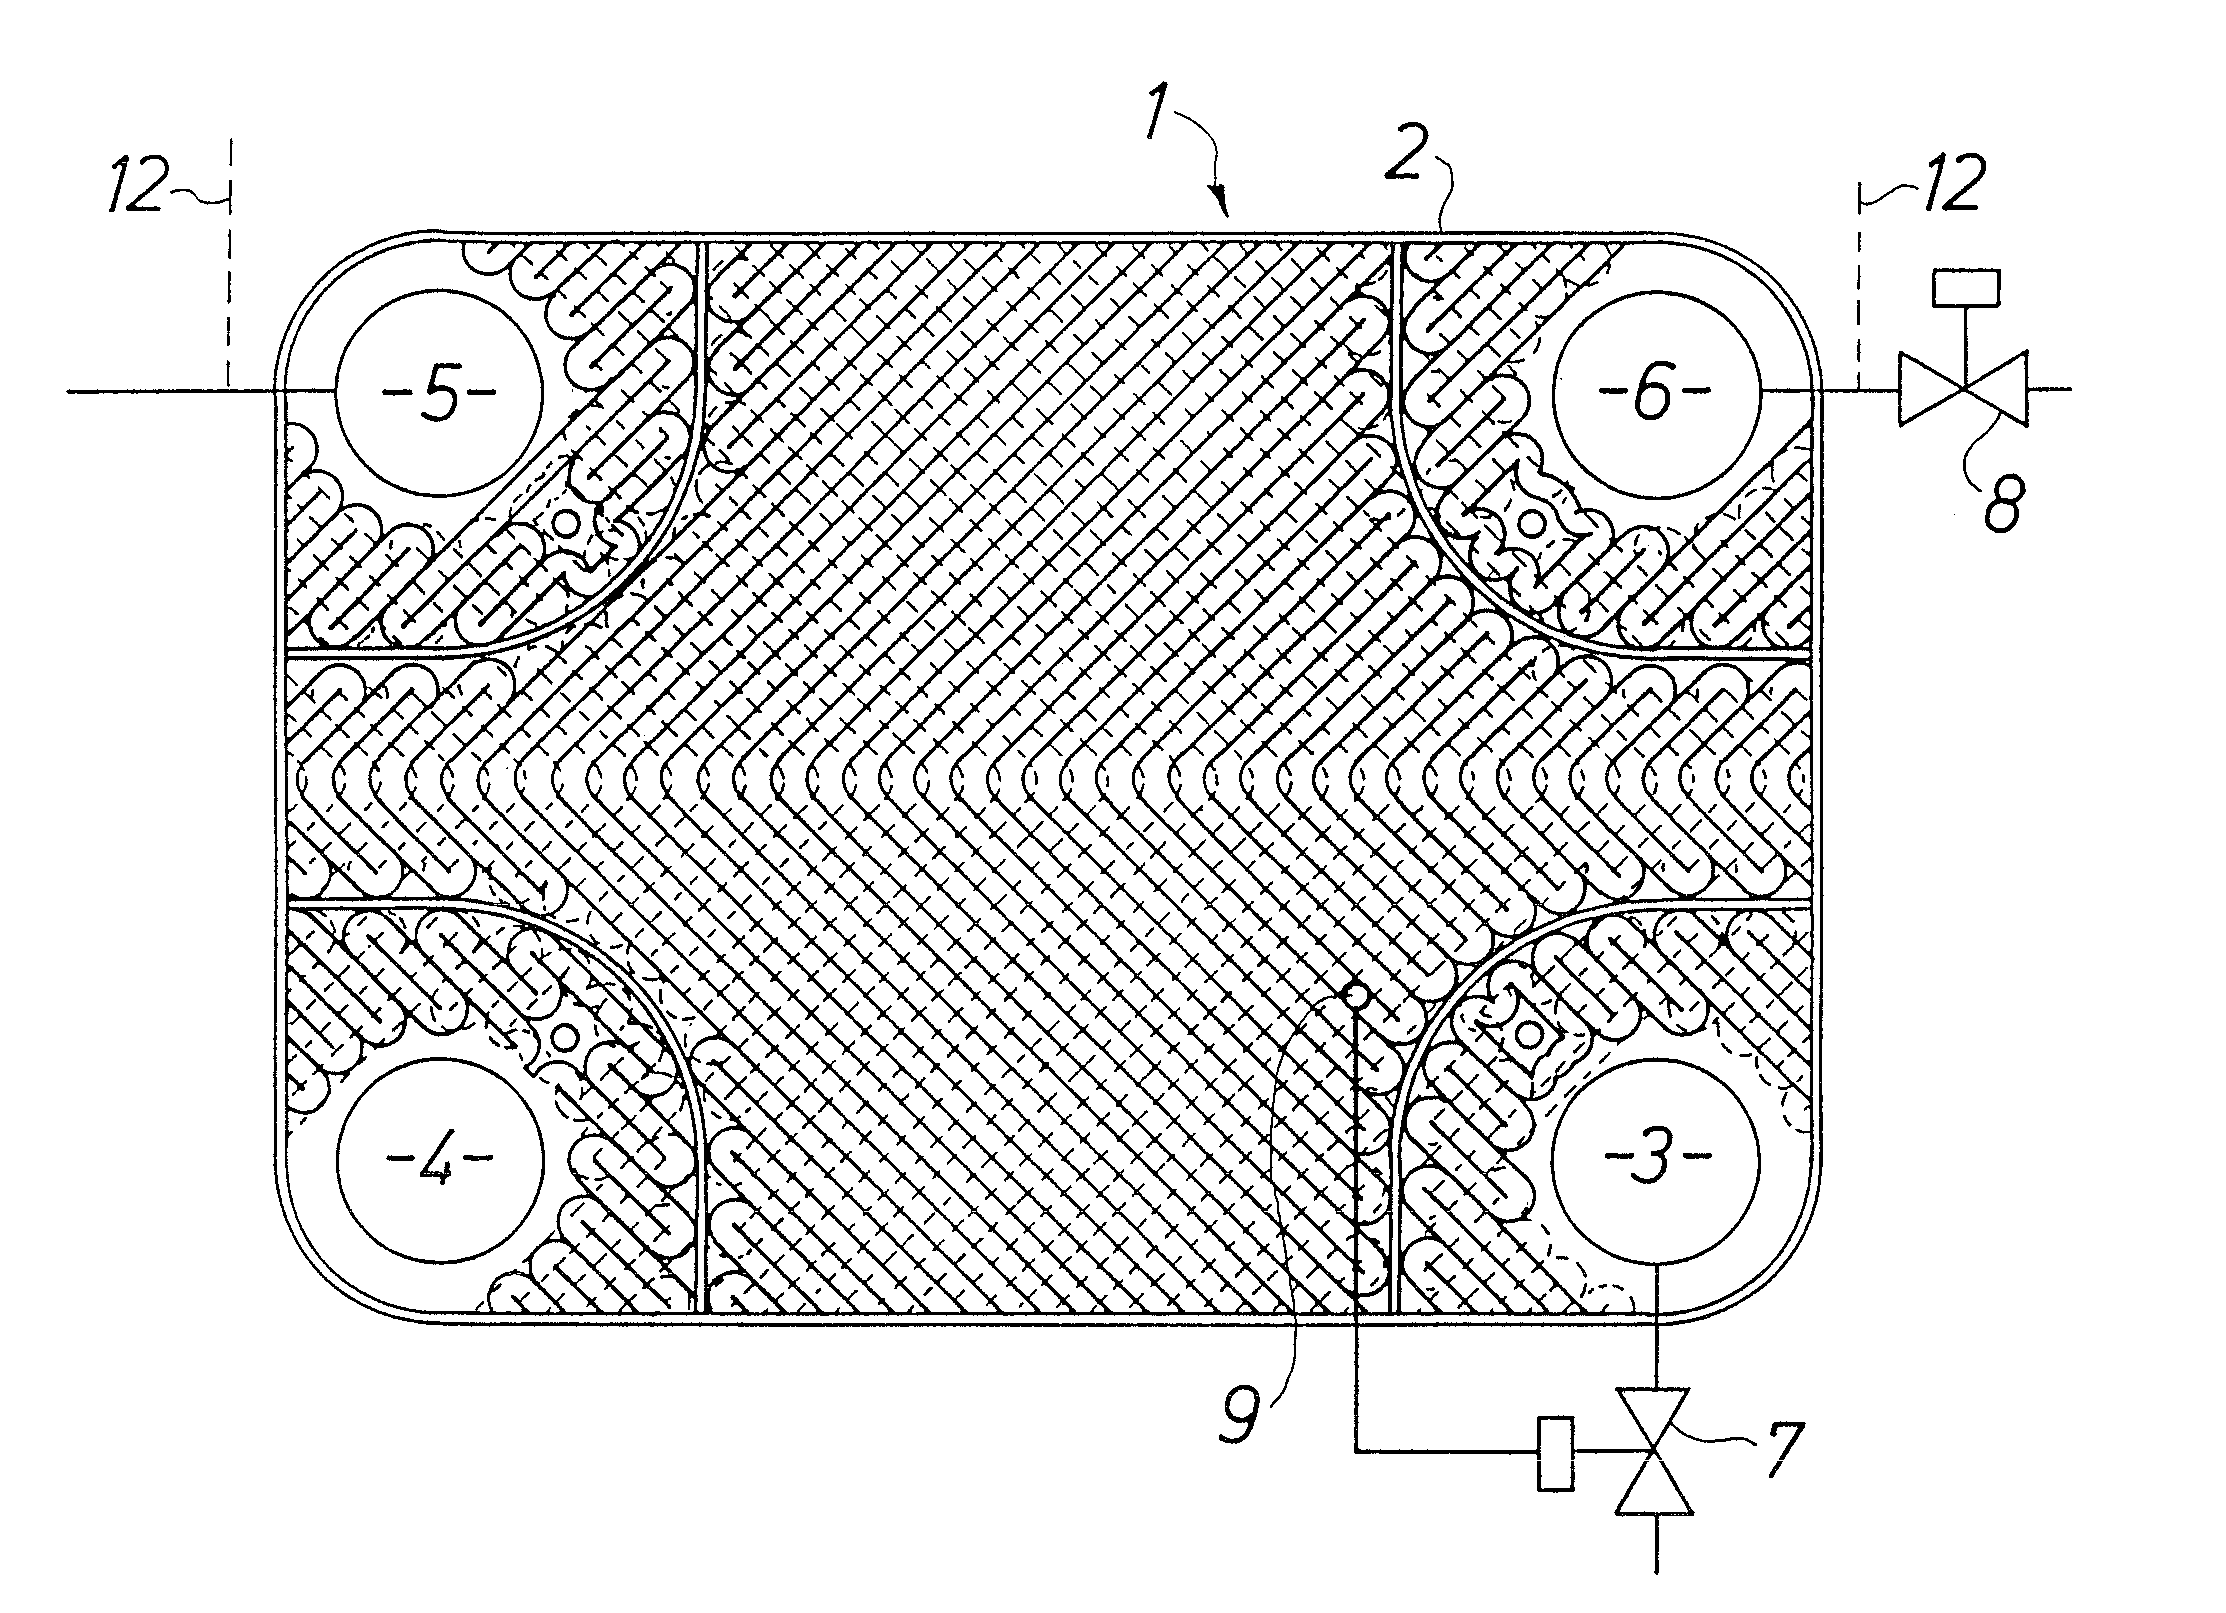 Heat Exchanger With Temperature-Controlled Valve